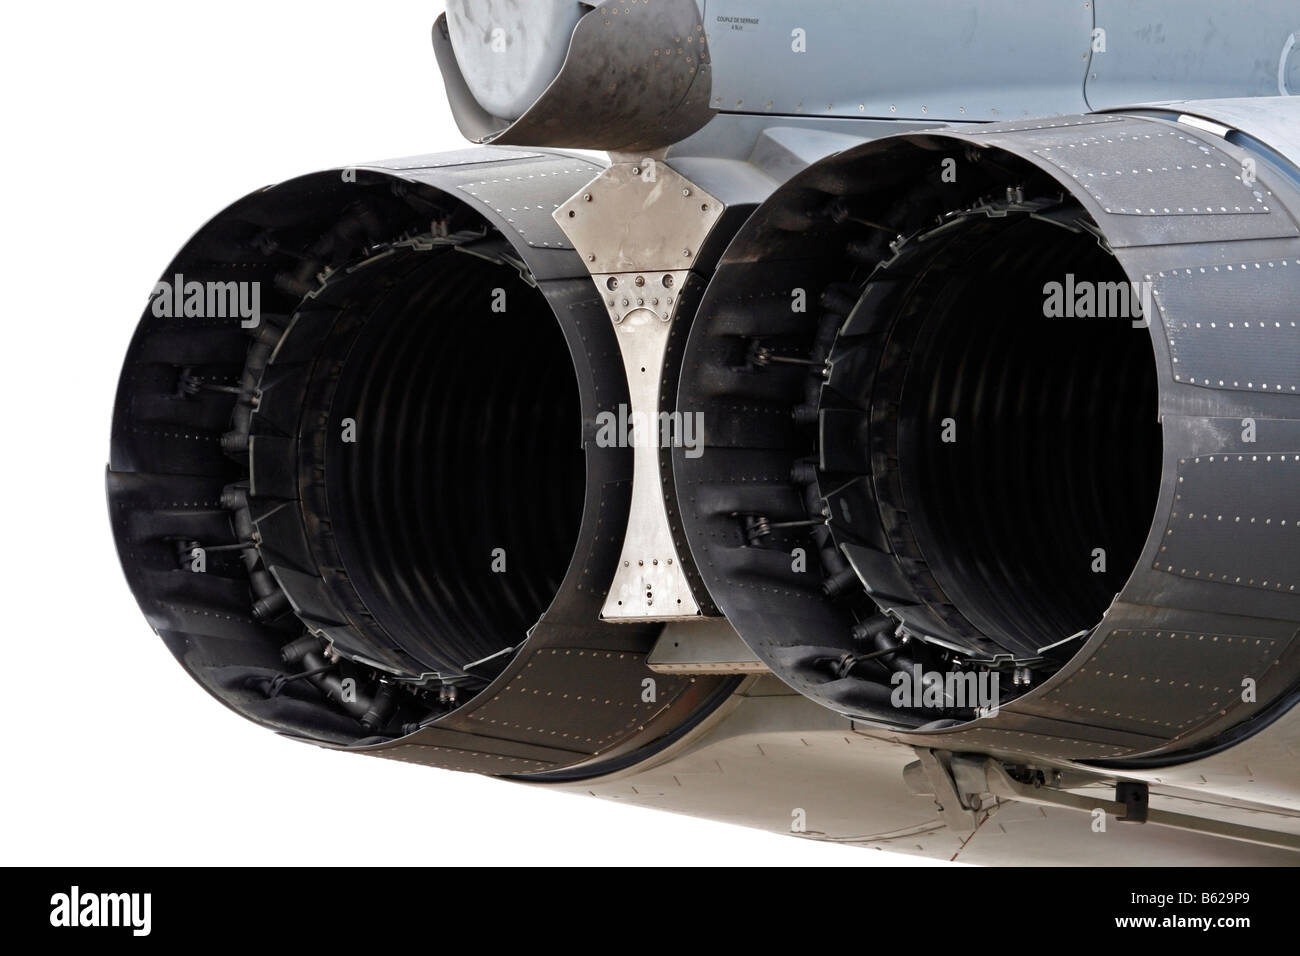 Engines, afterburners, fighter plane, military Stock Photo